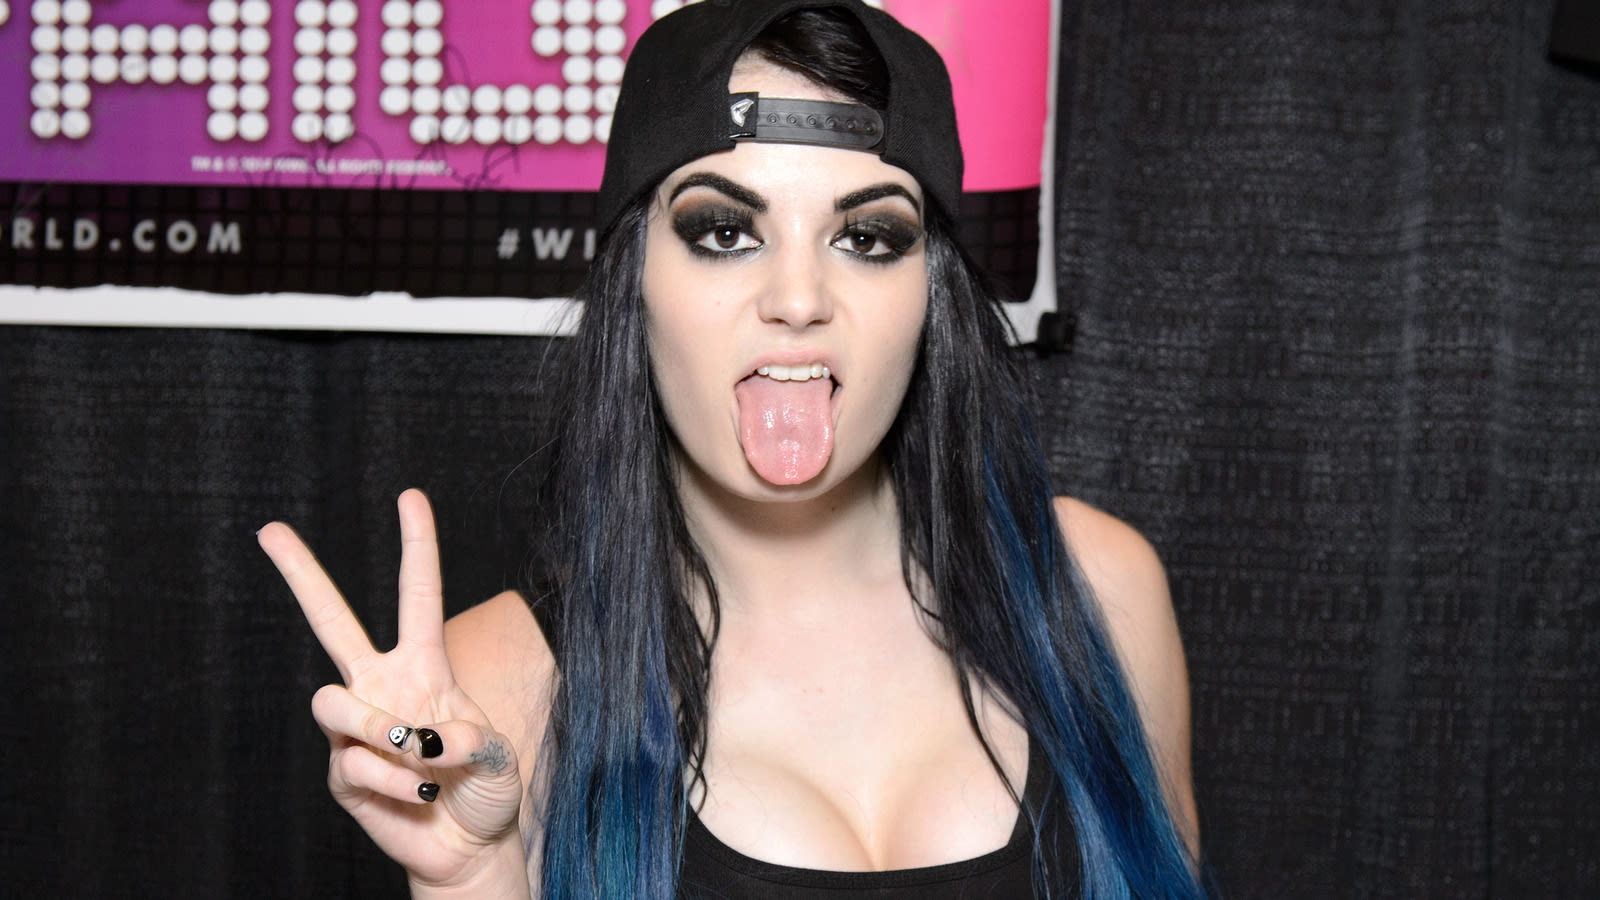 amber willyard recommends wwe paige new leak pic